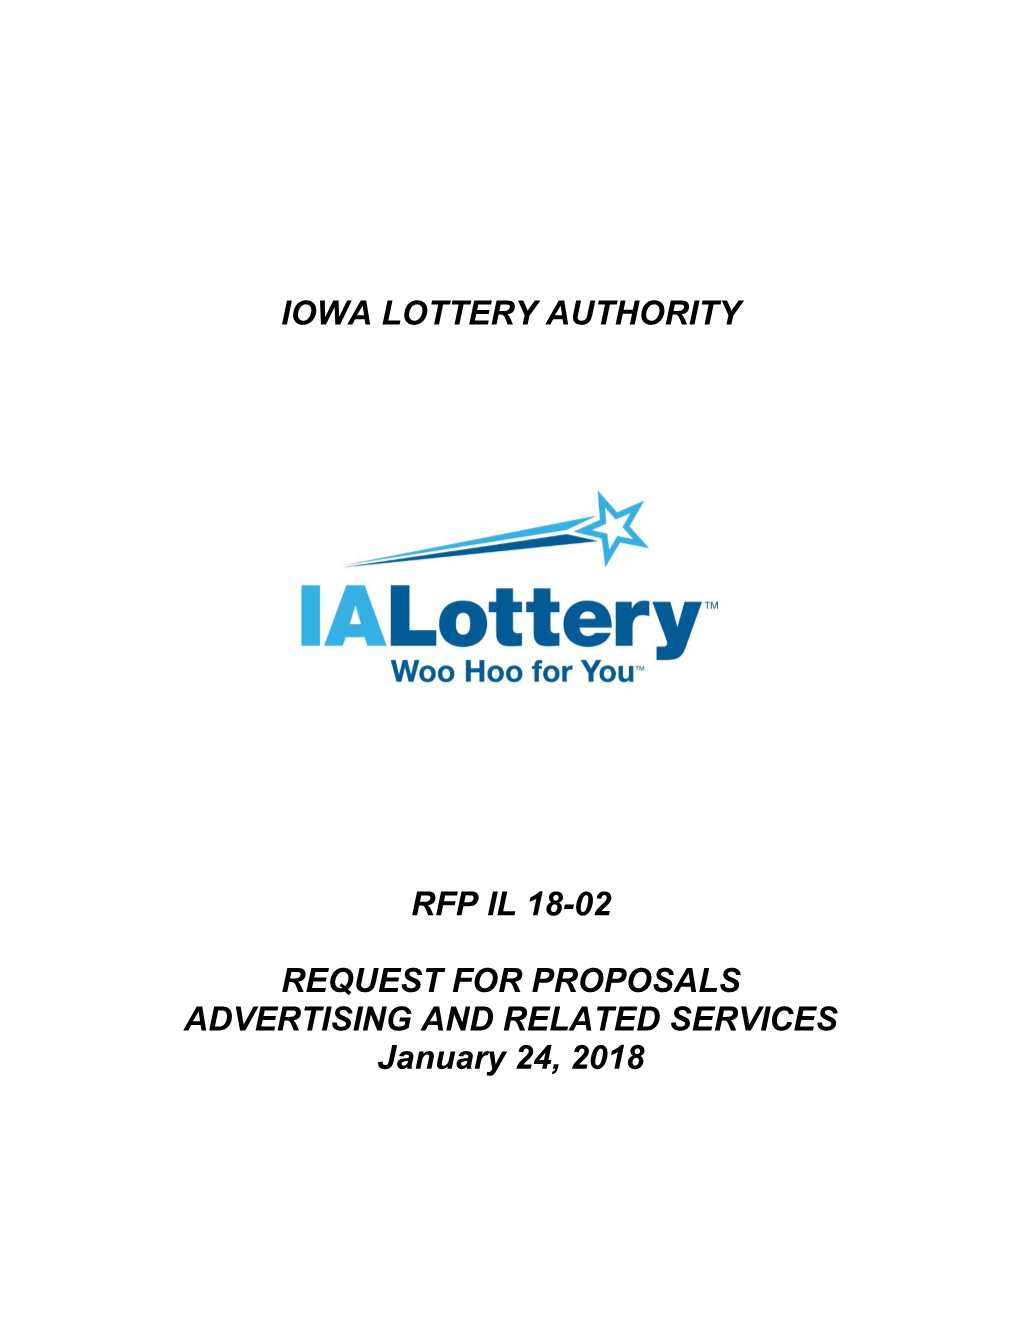 Iowa Lottery Authority Rfp Il 18-02 Request For